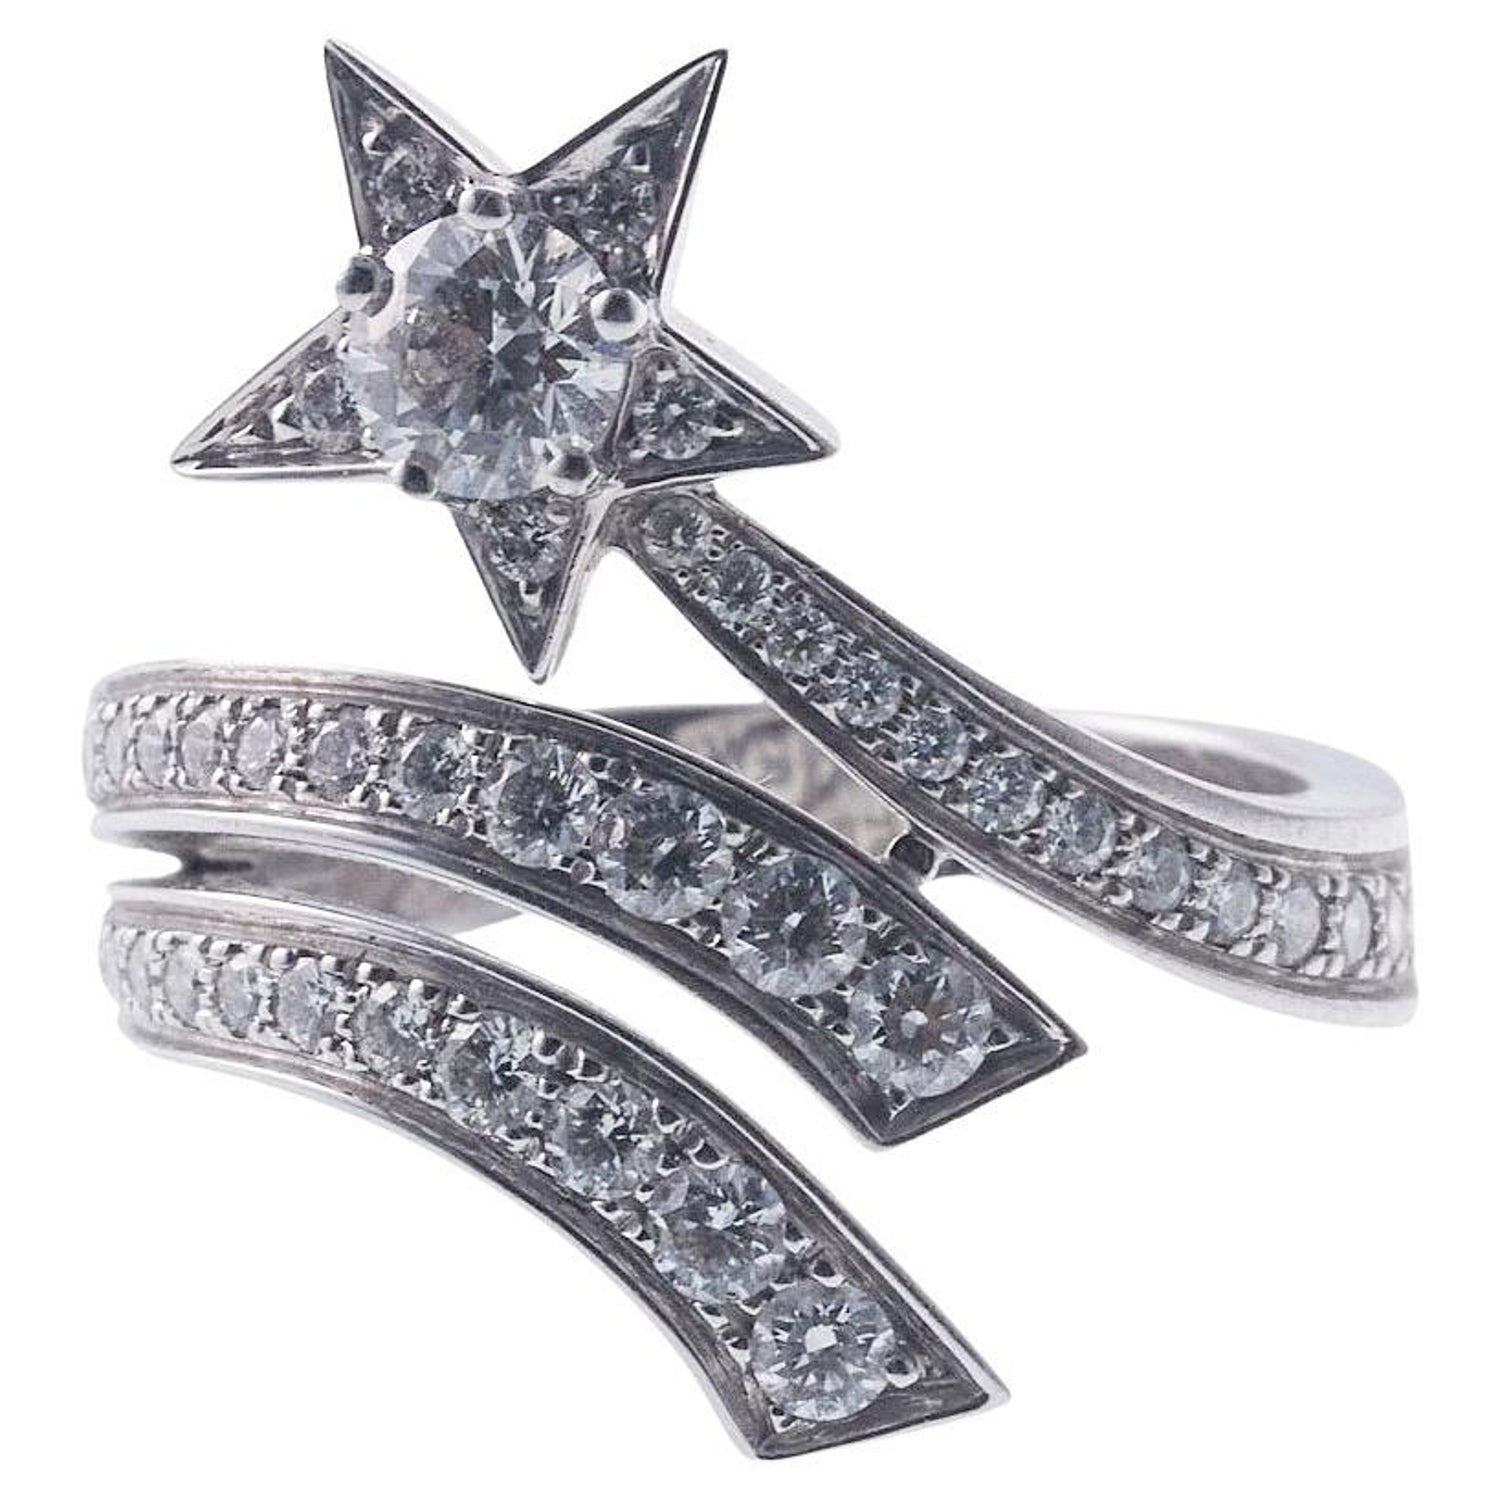 Chanel Star Ring - 18 For Sale on 1stDibs  chanel comete ring, chanel star  rings, chanel star diamond ring